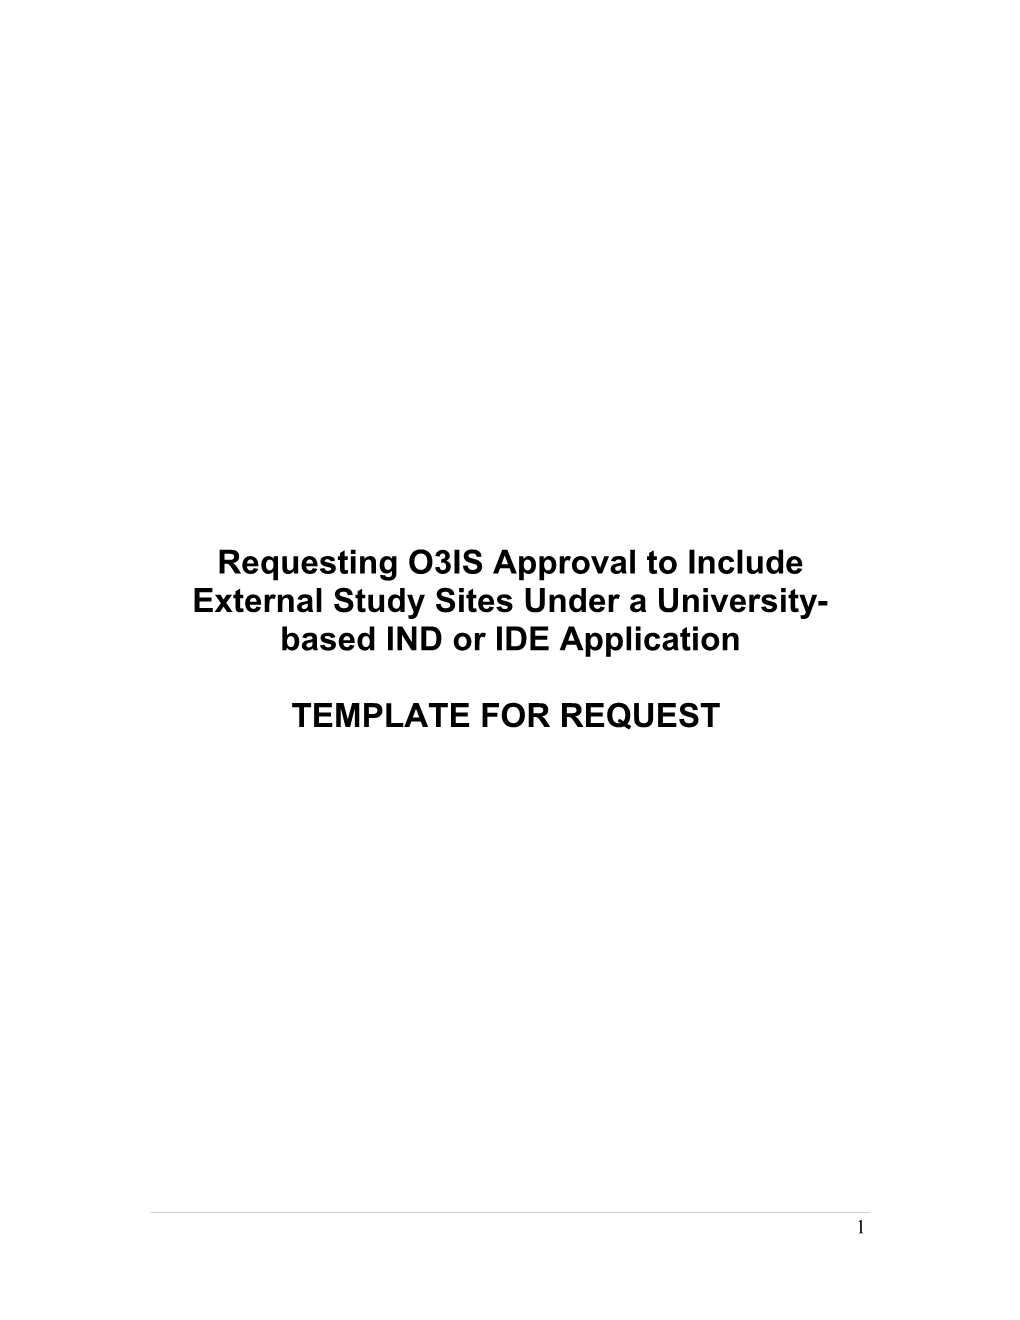 Requesting O3IS Approval to Include External Study Sites Under a University-Based IND